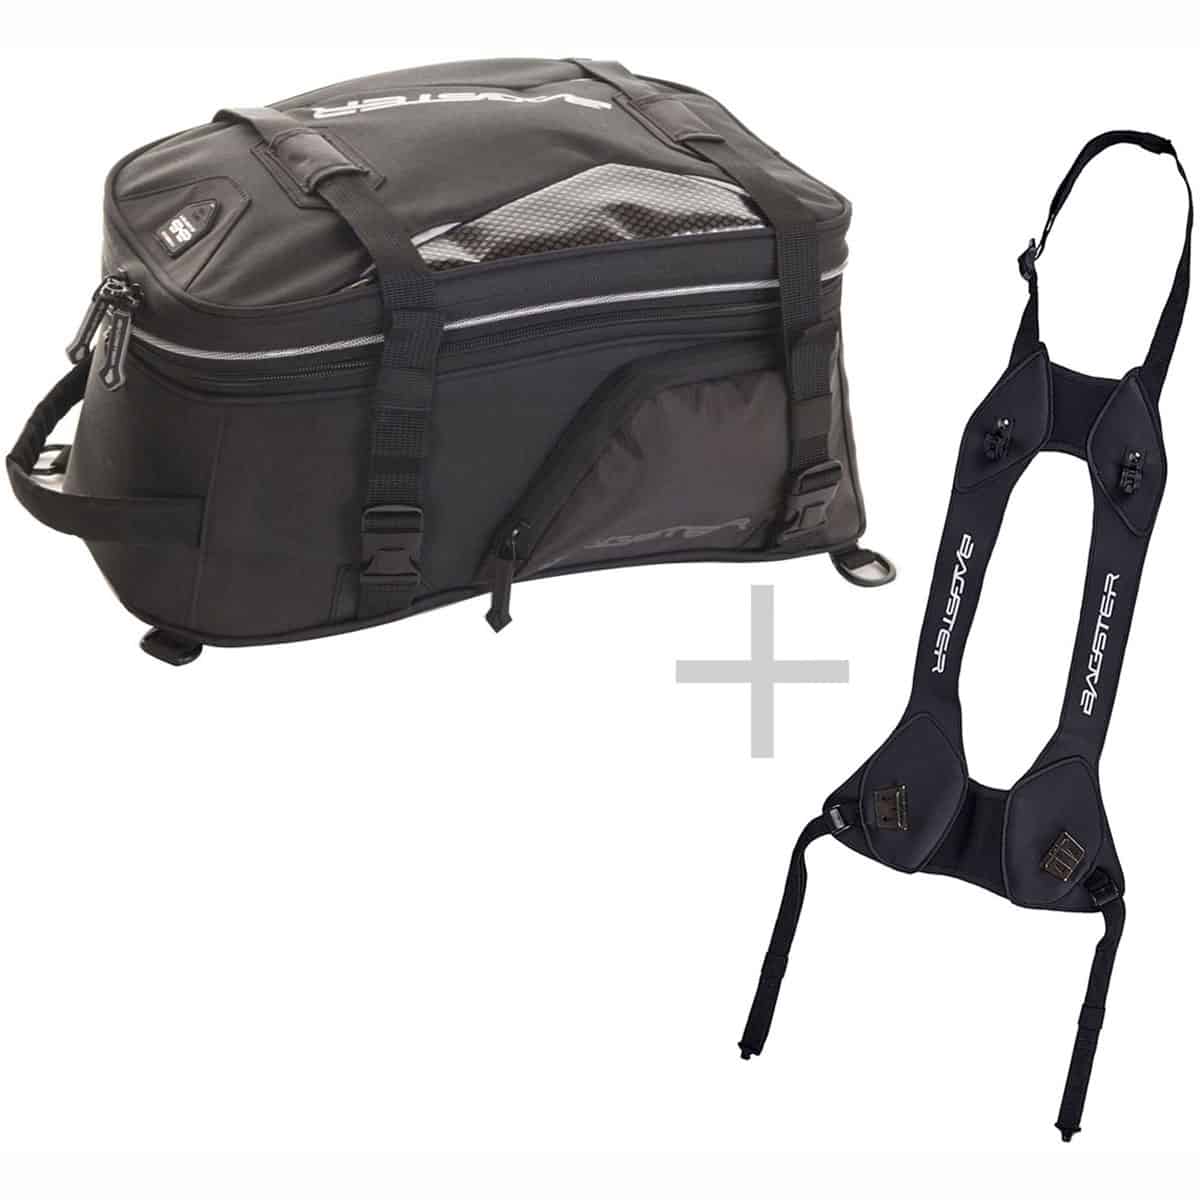 Bagster Modulo motorcycle luggage system: The tank bag to go with the Modulo tail pack bundle